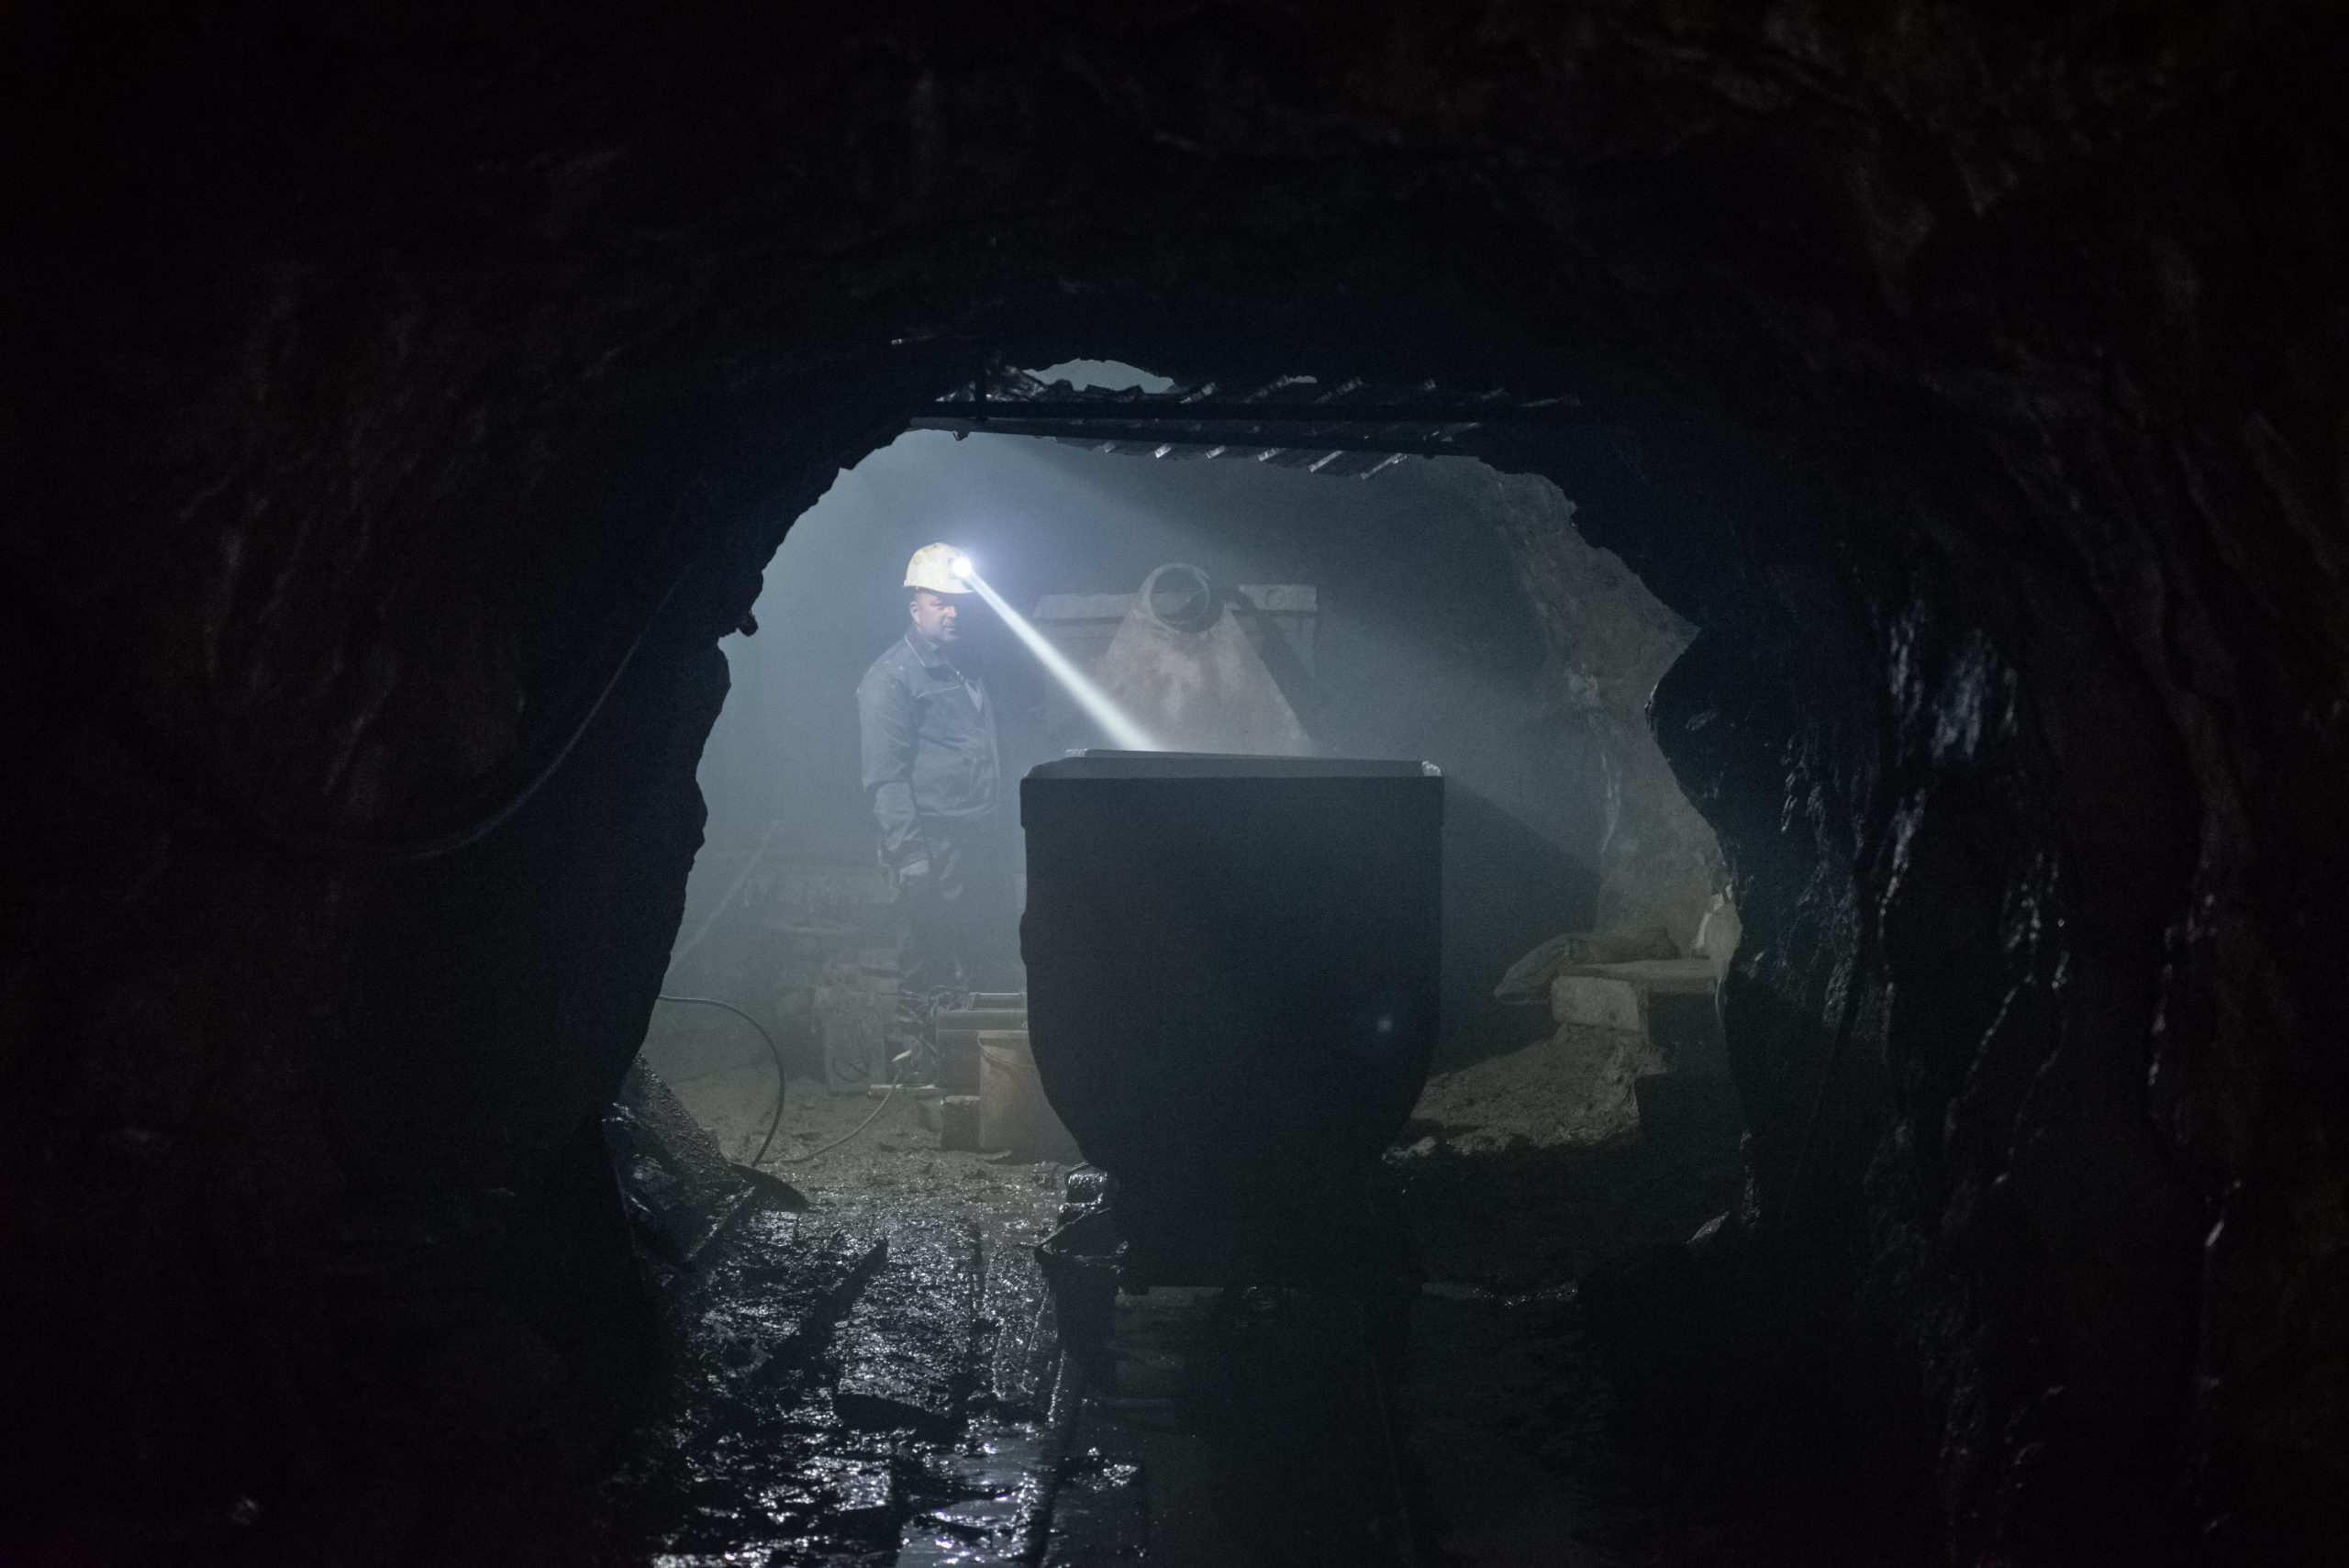 A miner at work in the gallery at the Trepça mine site in Crnac.